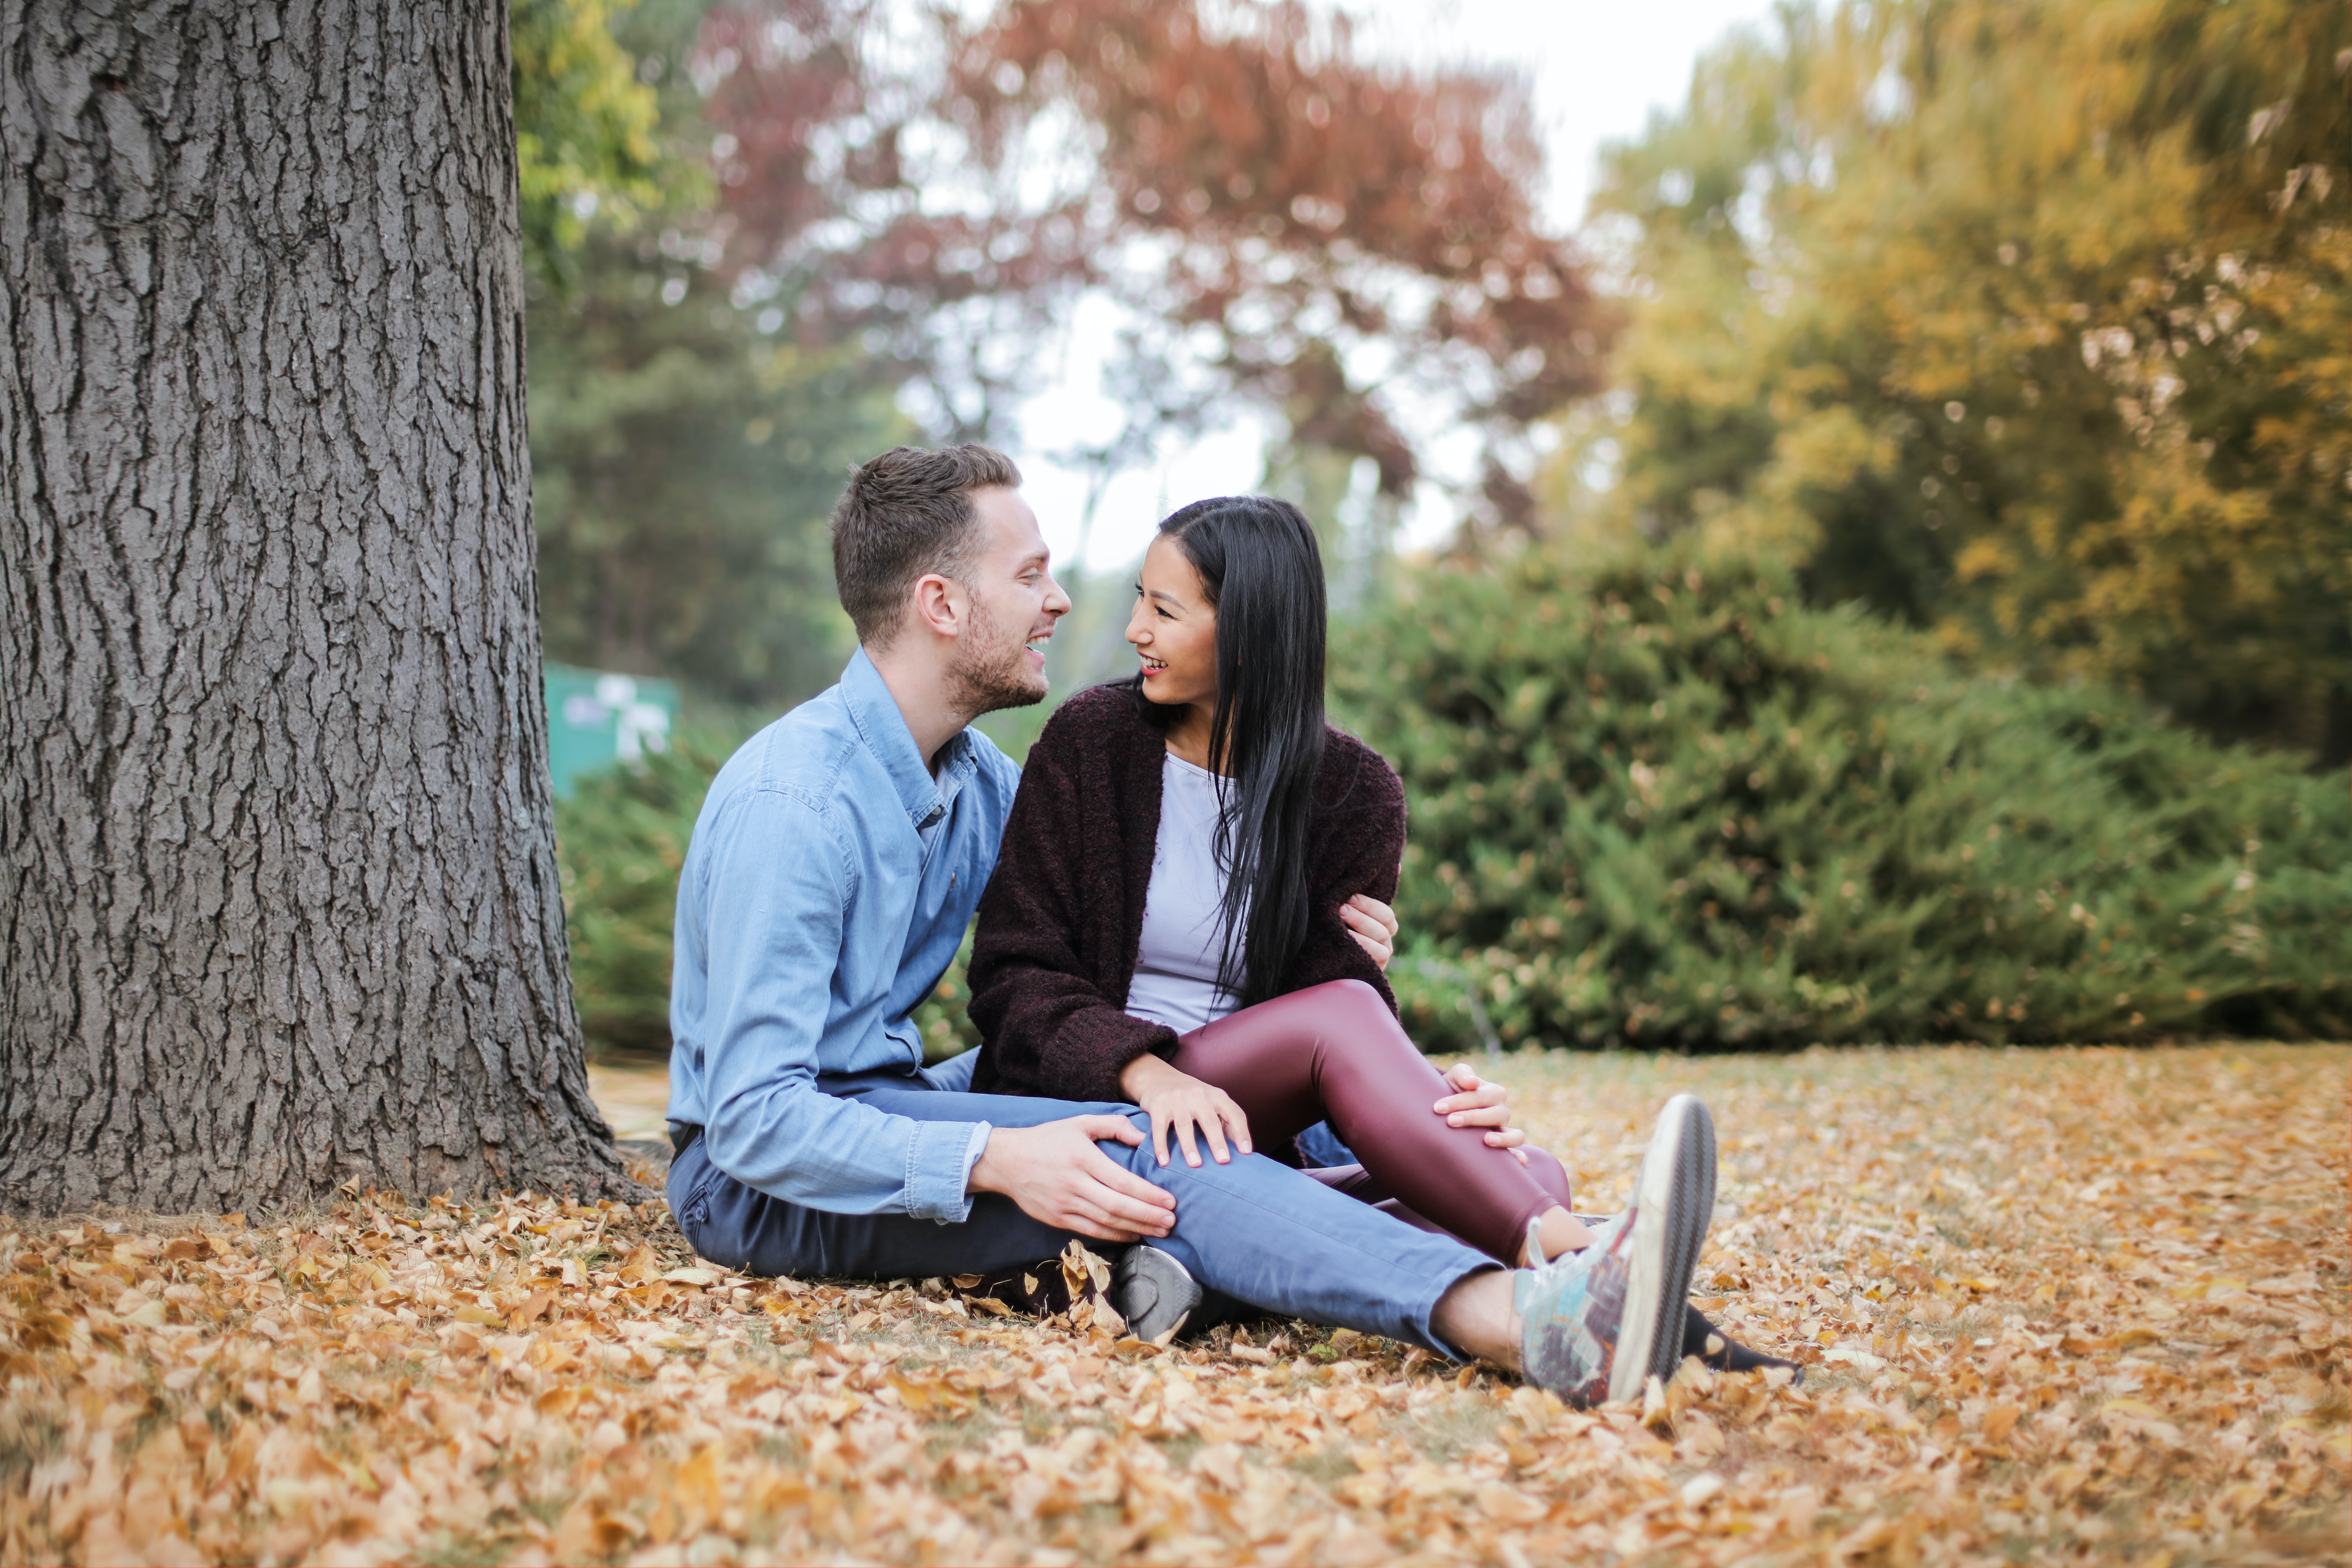 A couple smiling while sitting under a tree | Source: Pexels